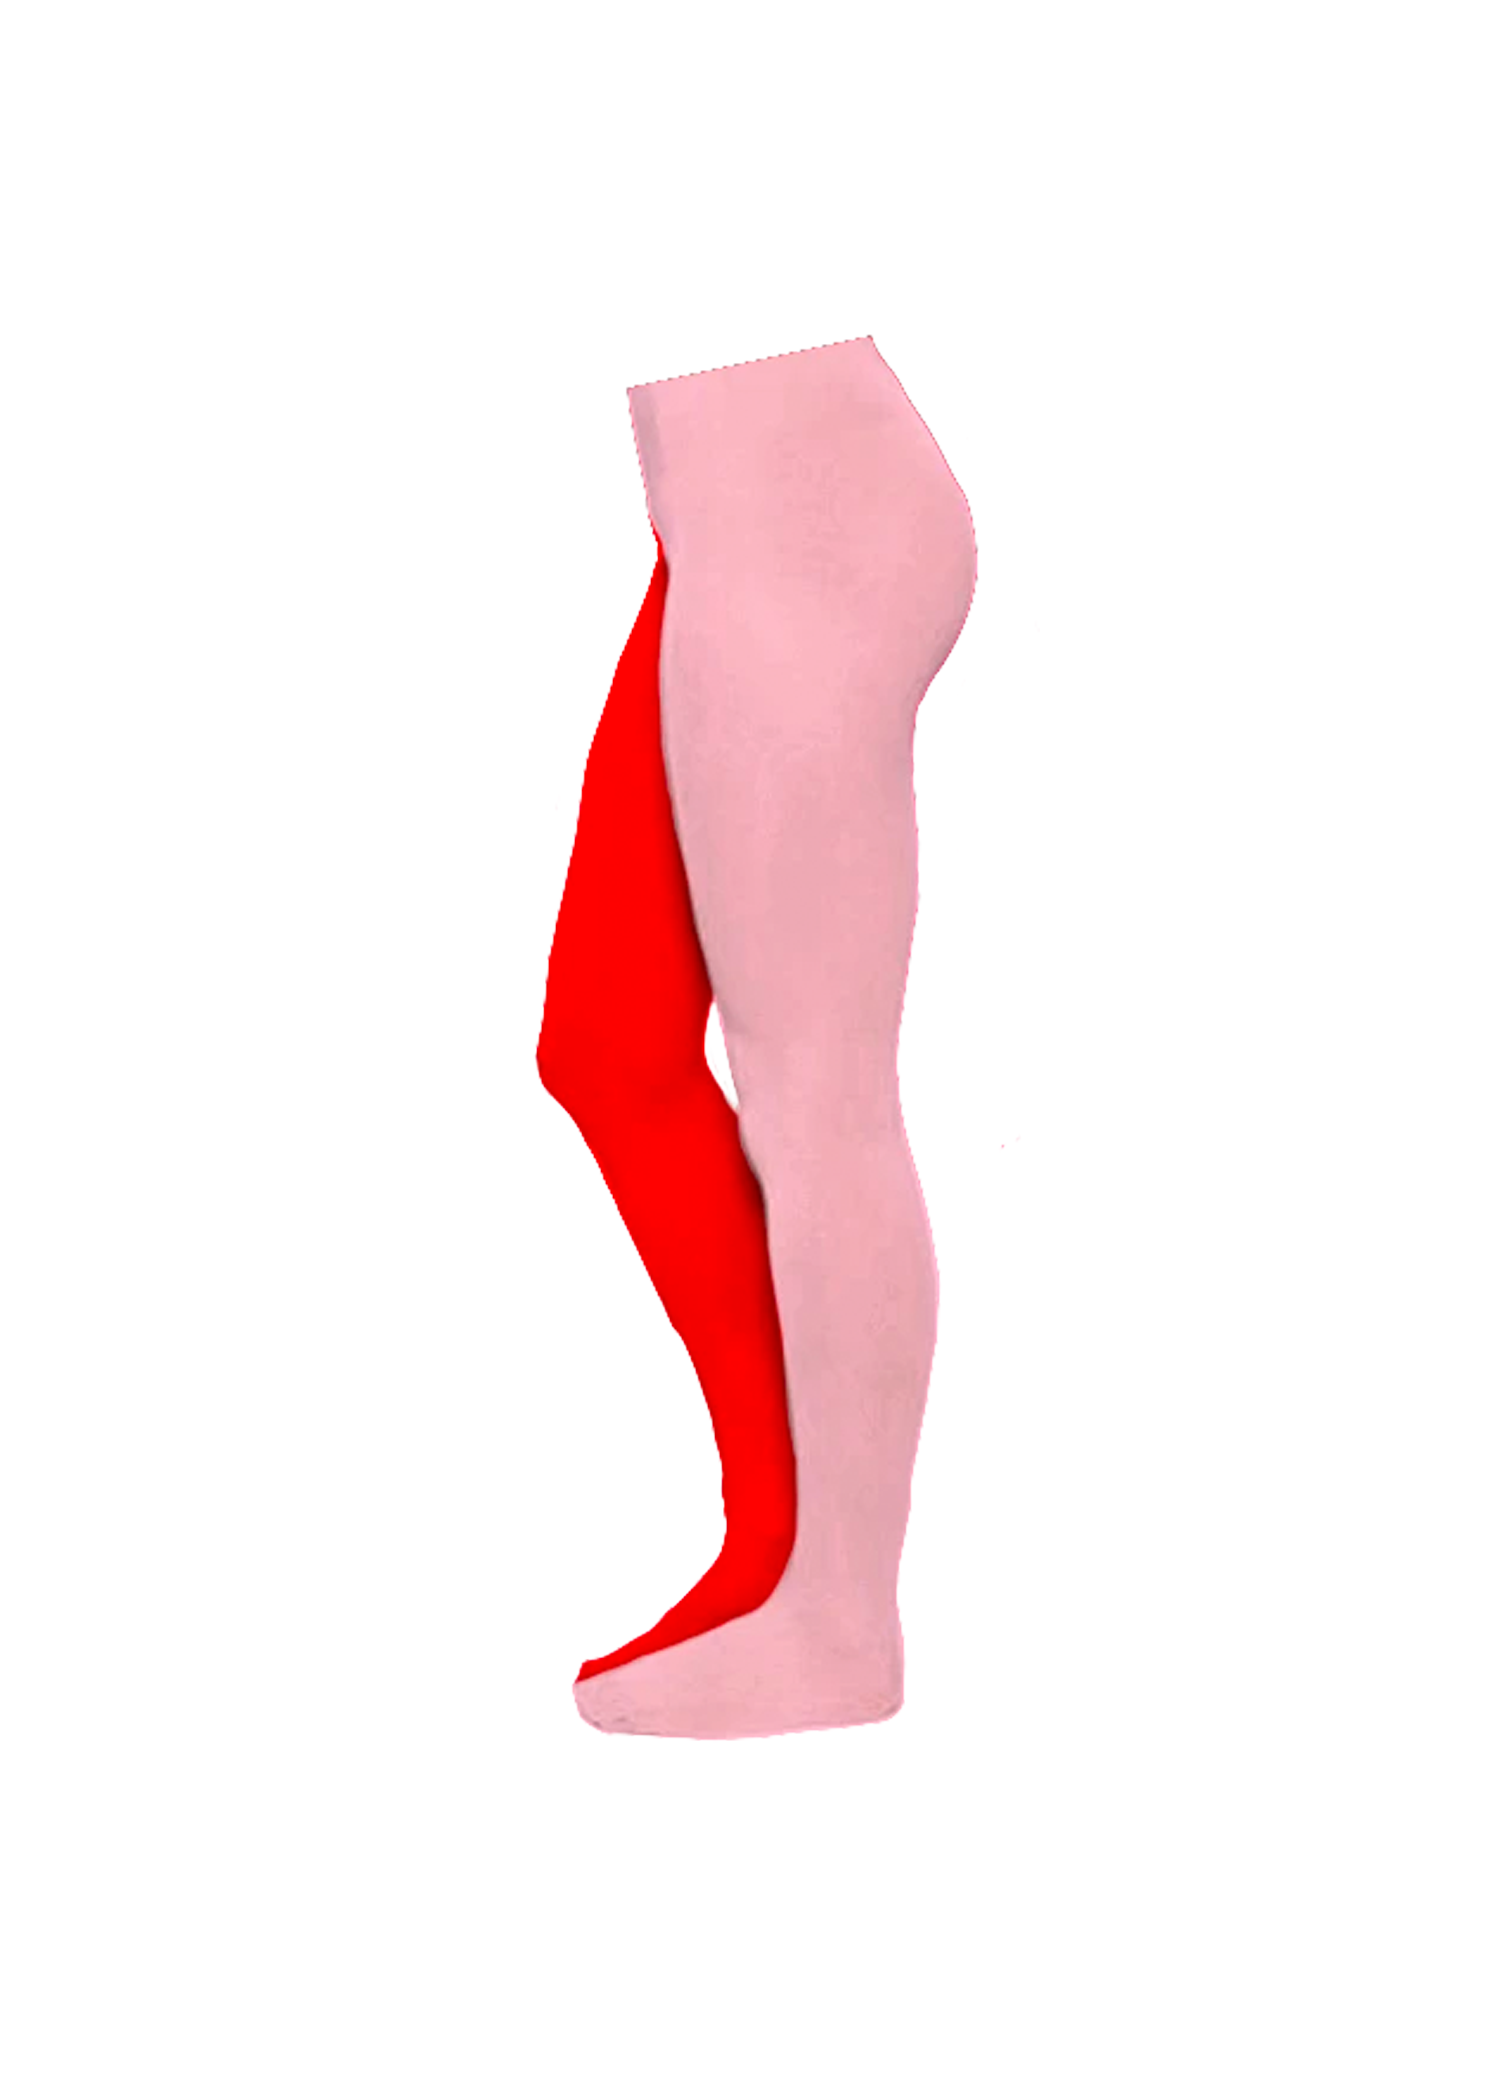 Pink Striped Tights for Women Durable Two-tone Colored Pantyhose -   Canada